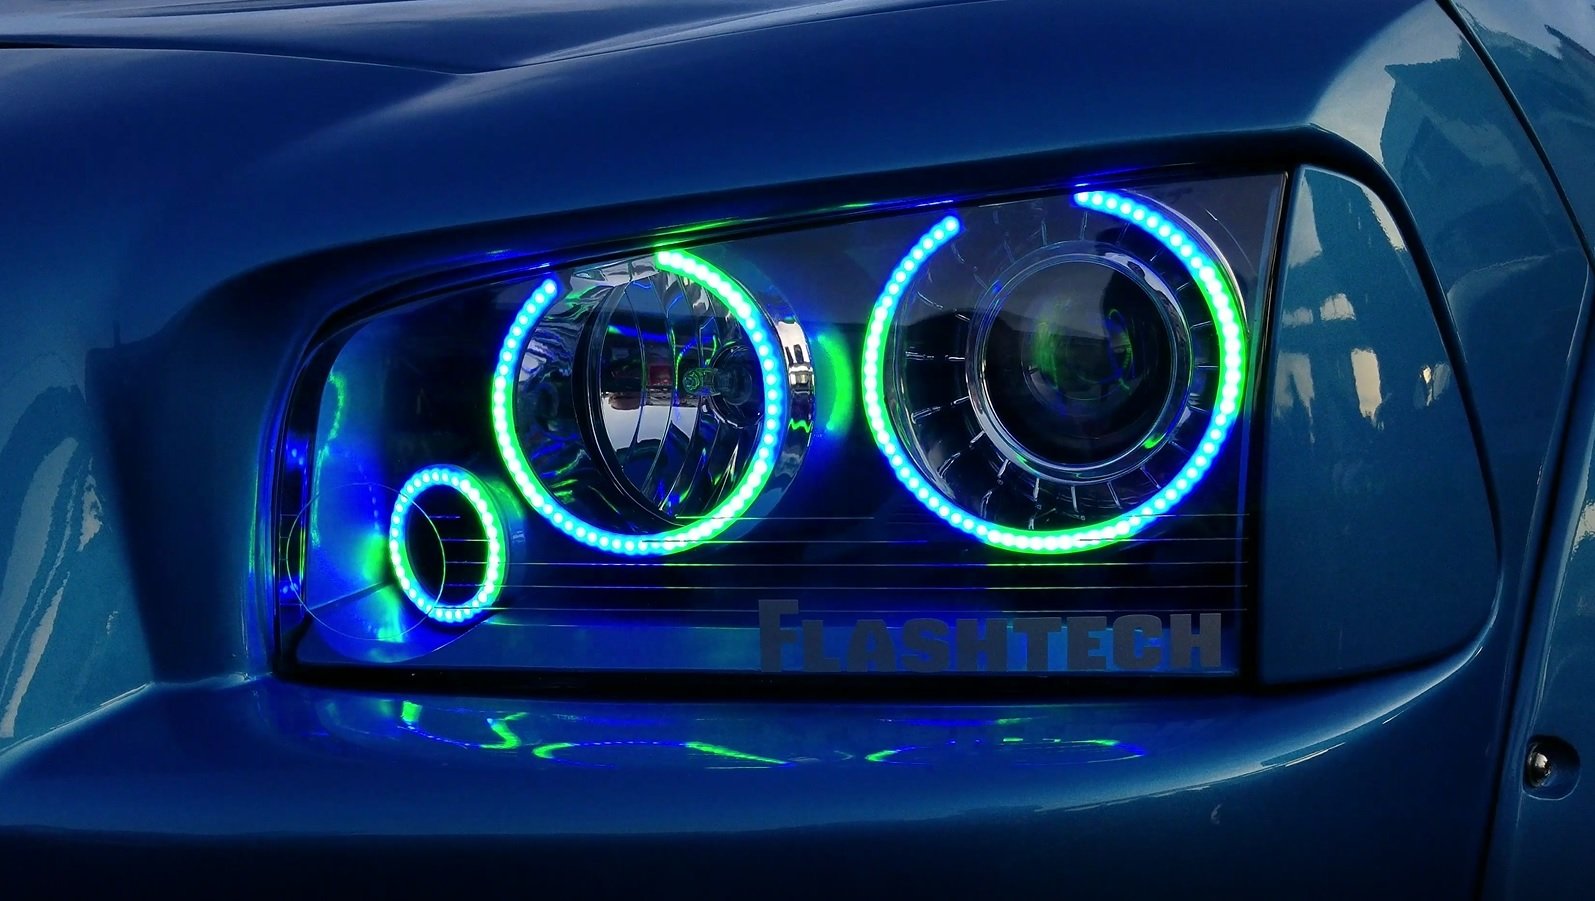 Nissan-350z-2003, 2004, 2005-LED-Halo-Headlights-ColorChase-No Remote-NI-35Z0305-CCH